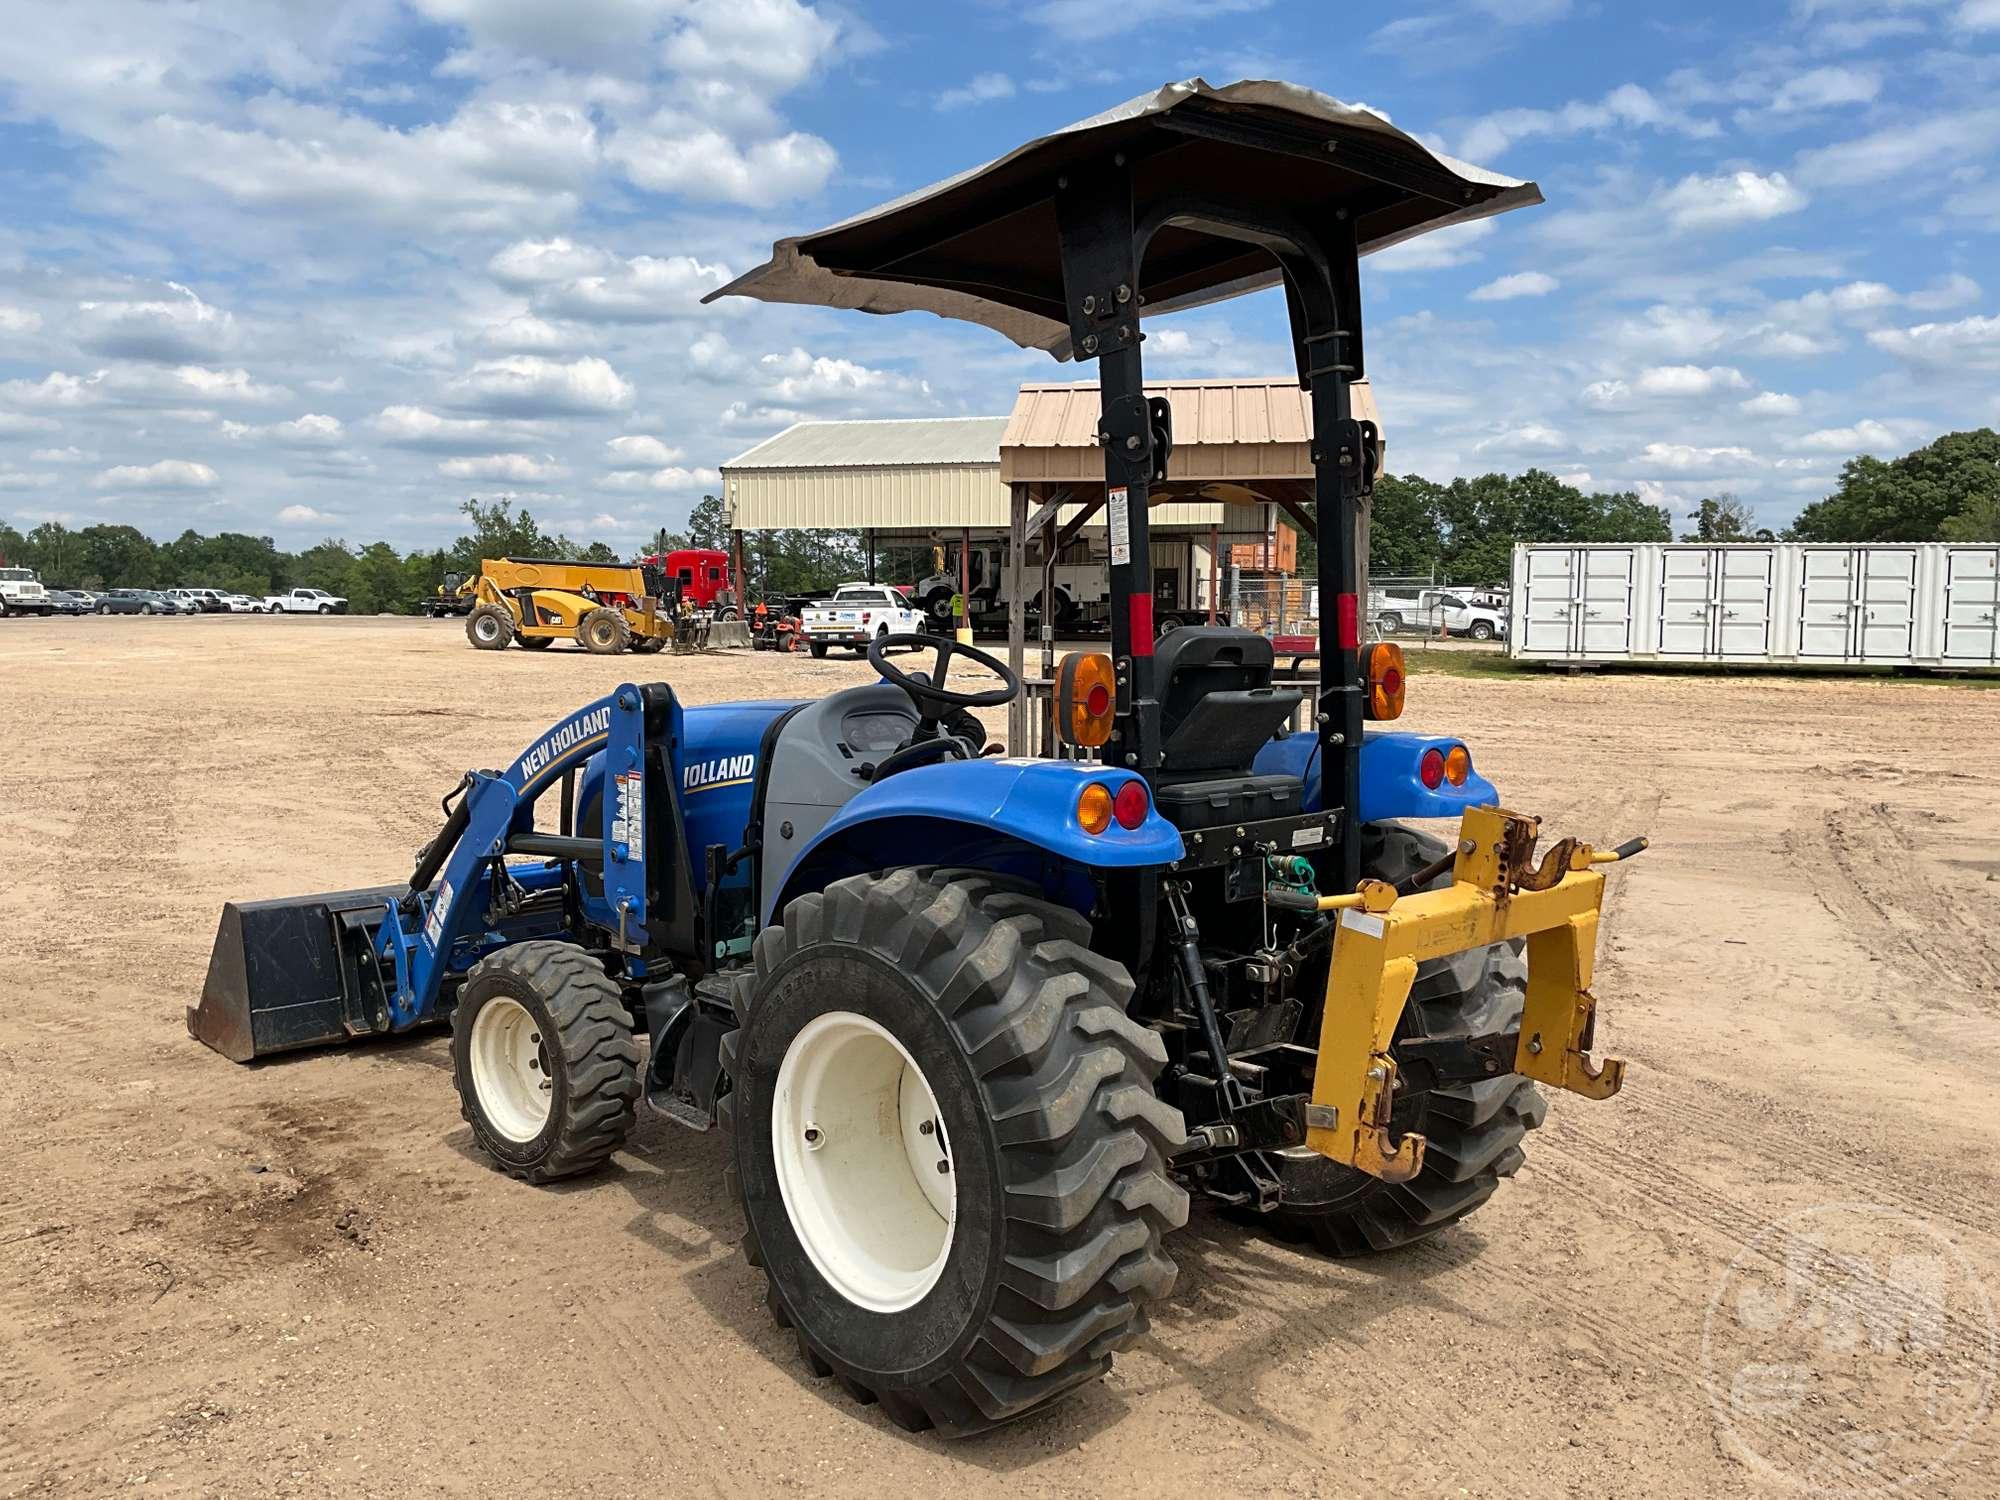 NEW HOLLAND BOOMER 33 4X4 TRACTOR W/ LOADER SN: RF000565